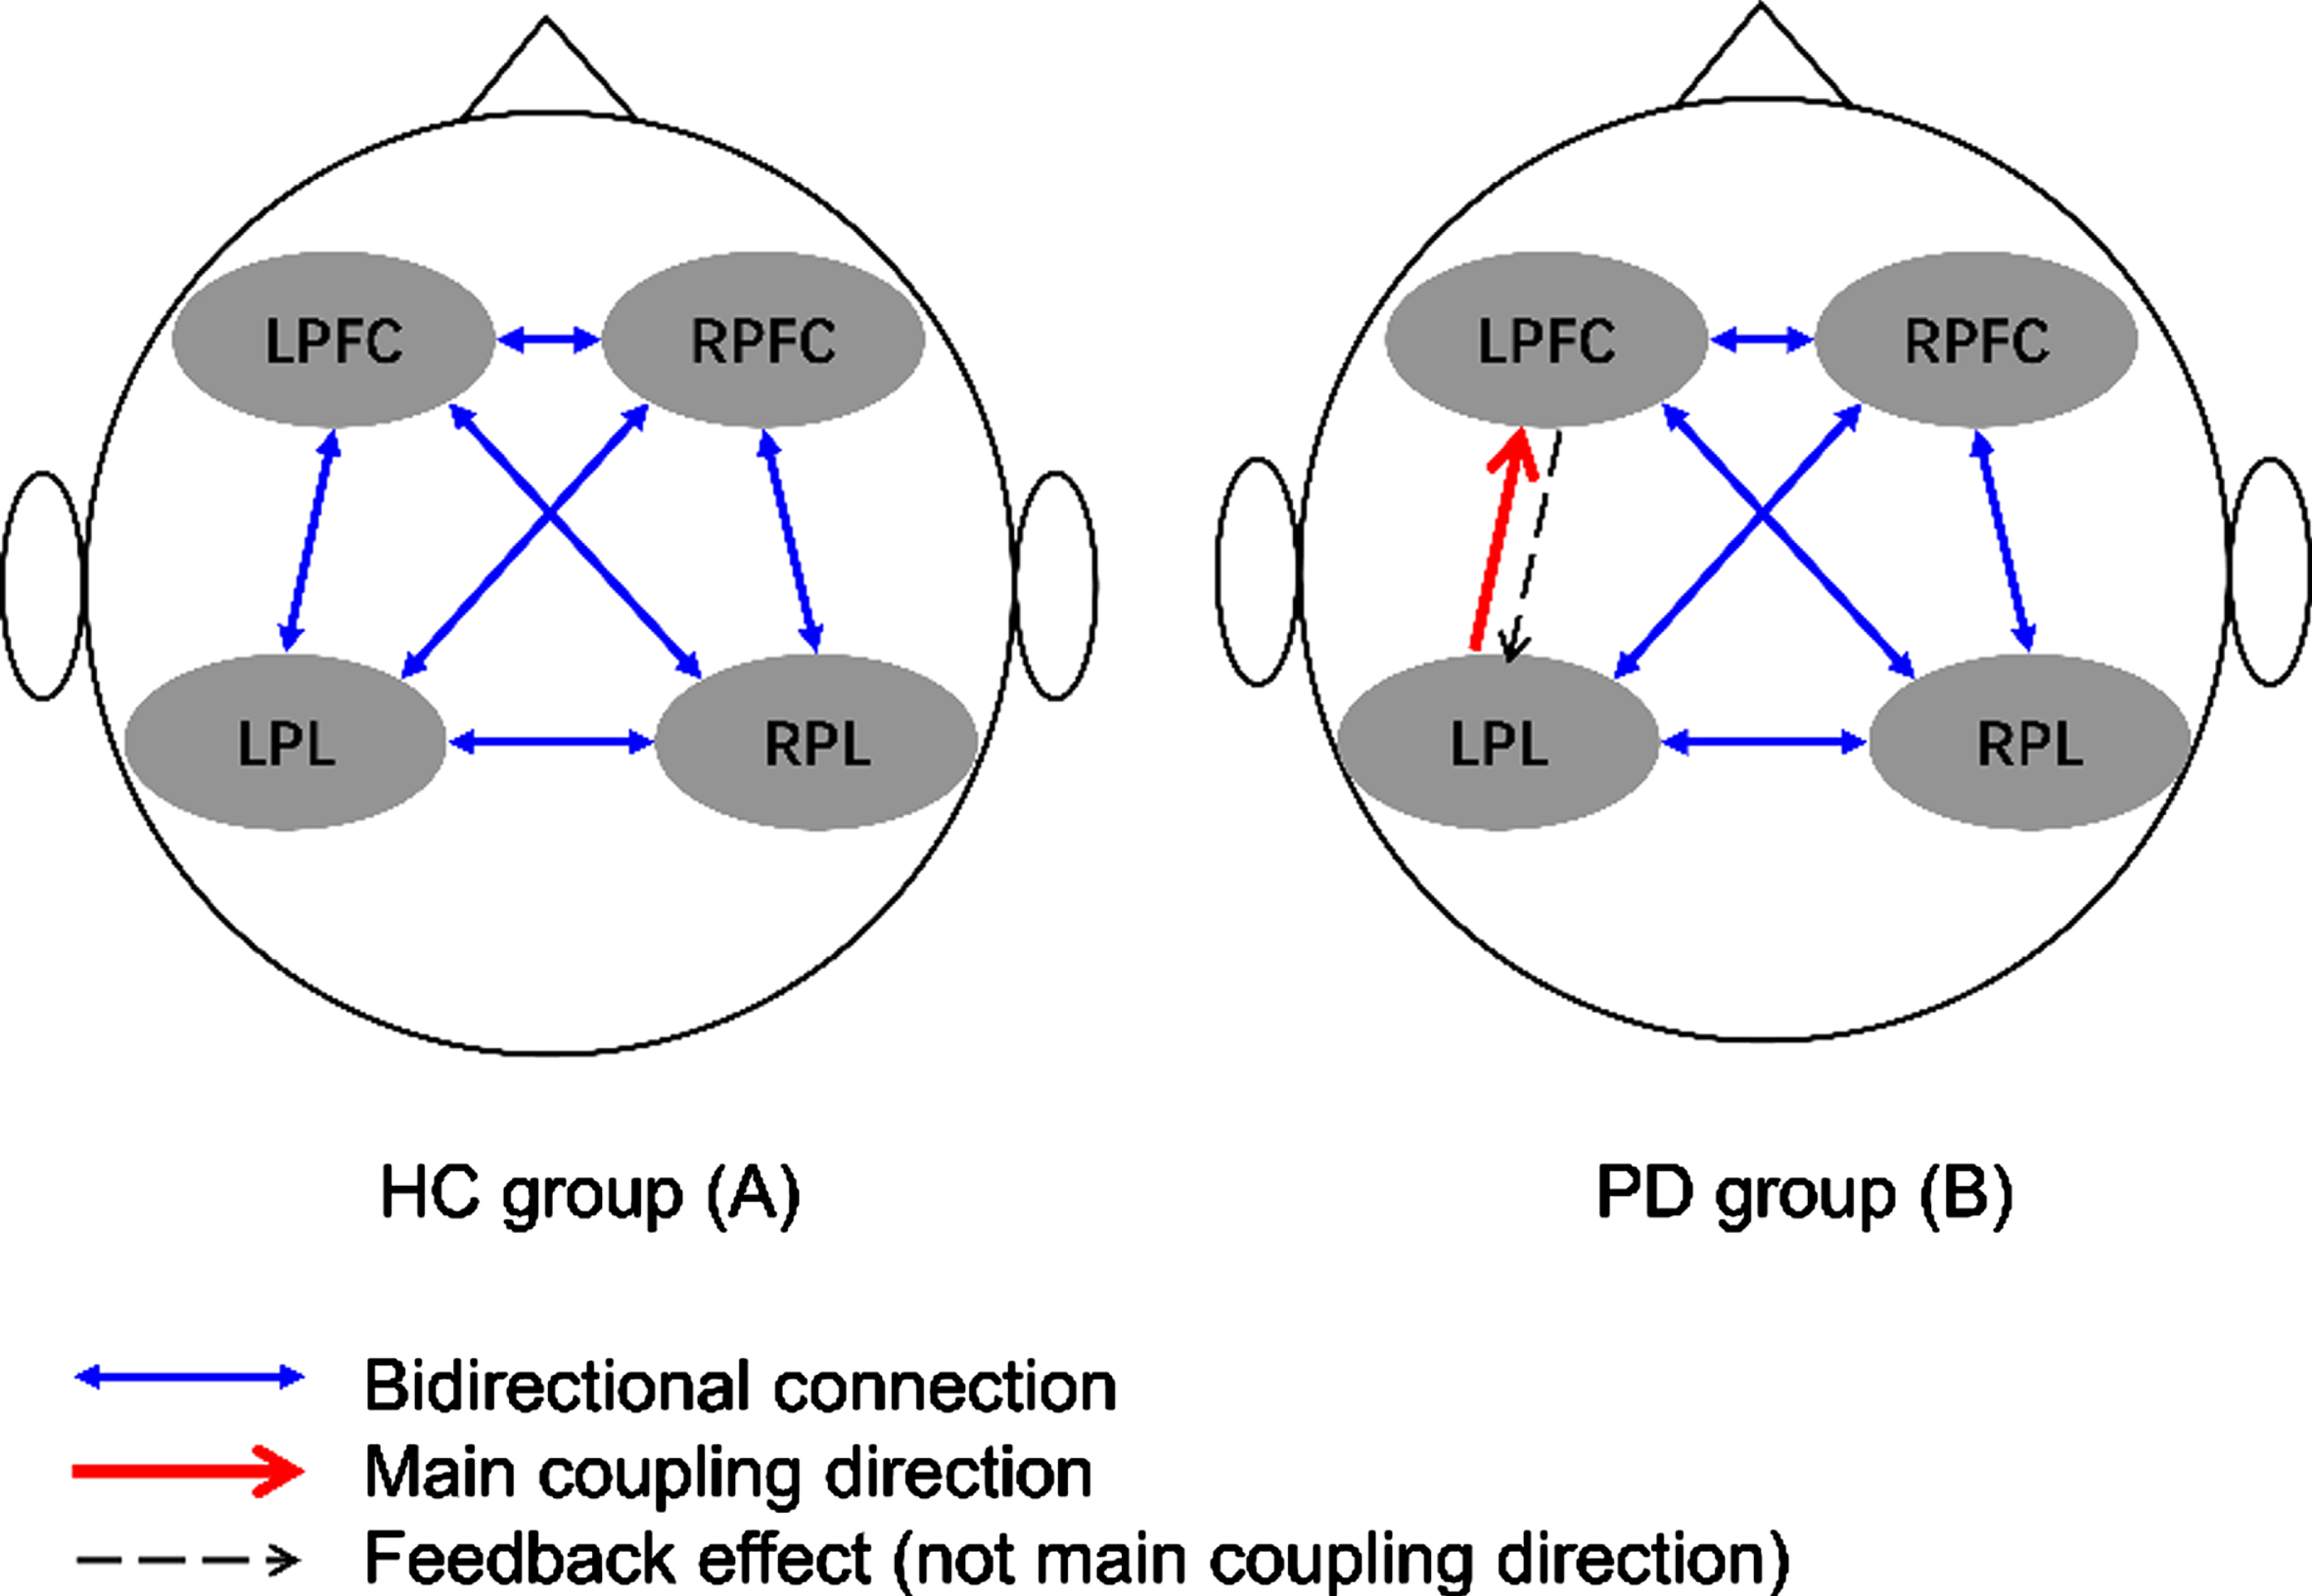 Main coupling directions (mCDs) among brain regions in healthy controls (A) and individuals with Parkinson’s disease (B). LPFC, left prefrontal cortex; LPL, left parietal lobe; RFFC, right prefrontal cortex; RPL, right parietal lobe.